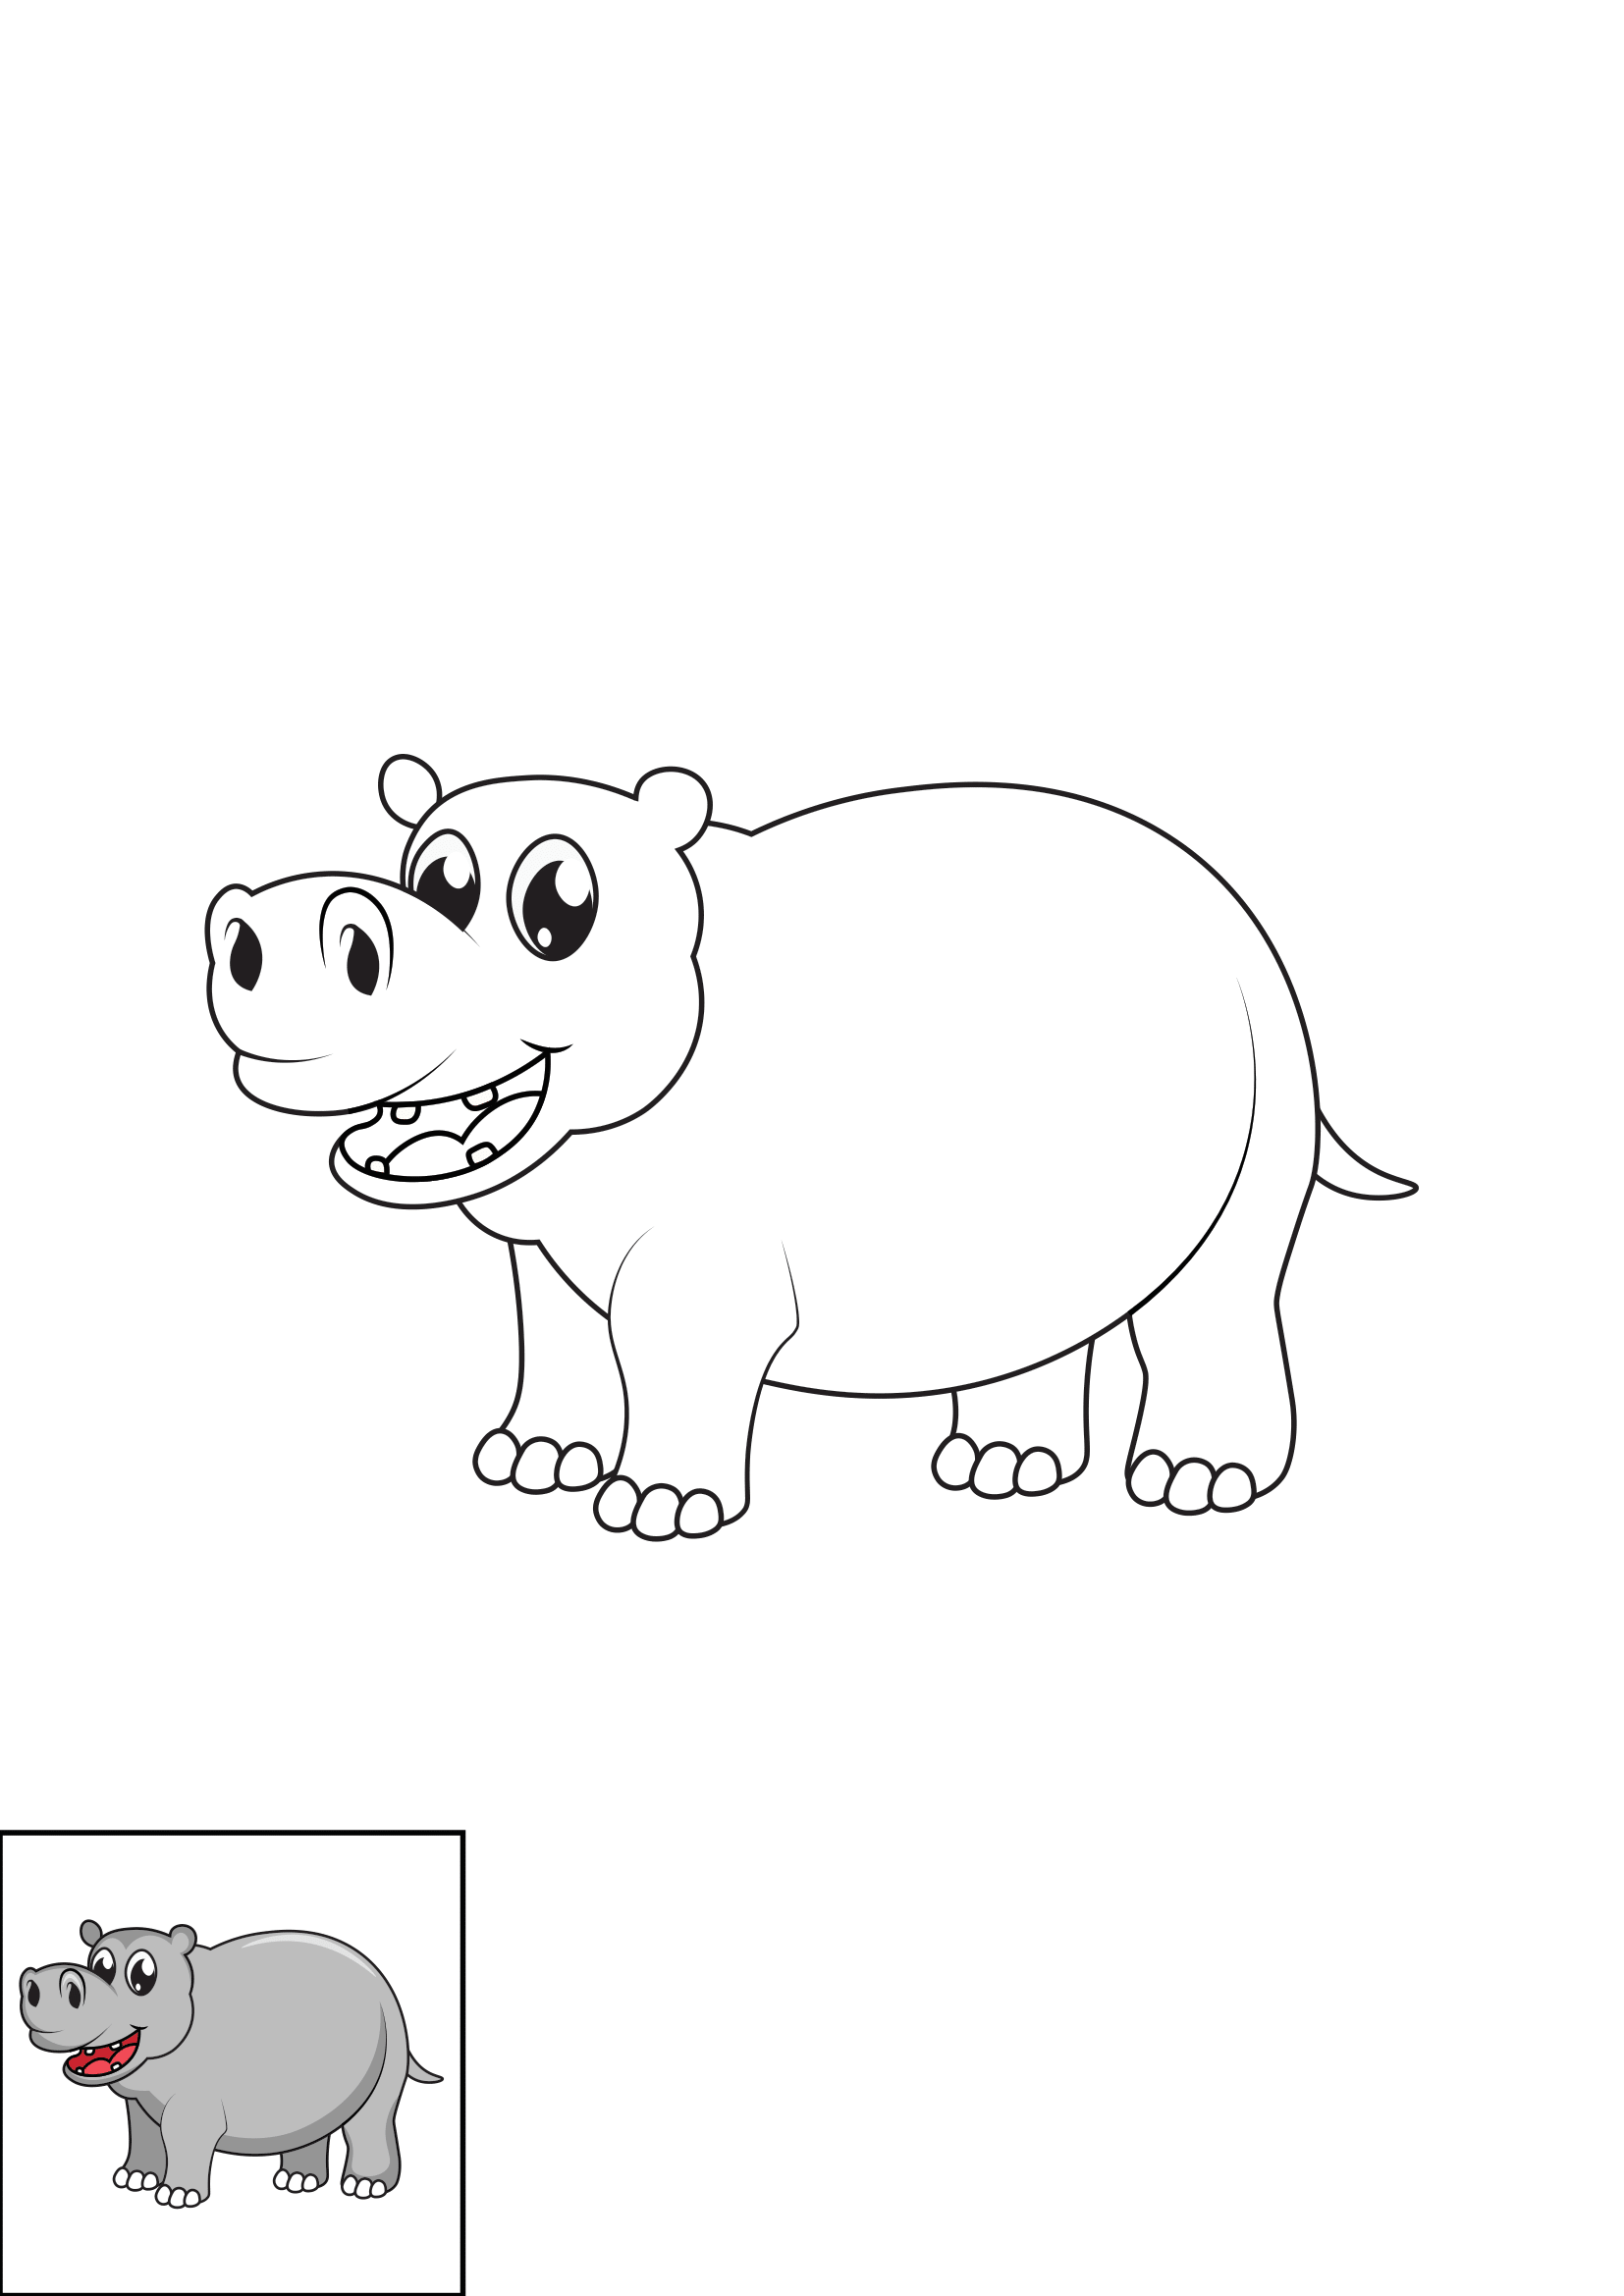 How to Draw A Hippo Step by Step Printable Color